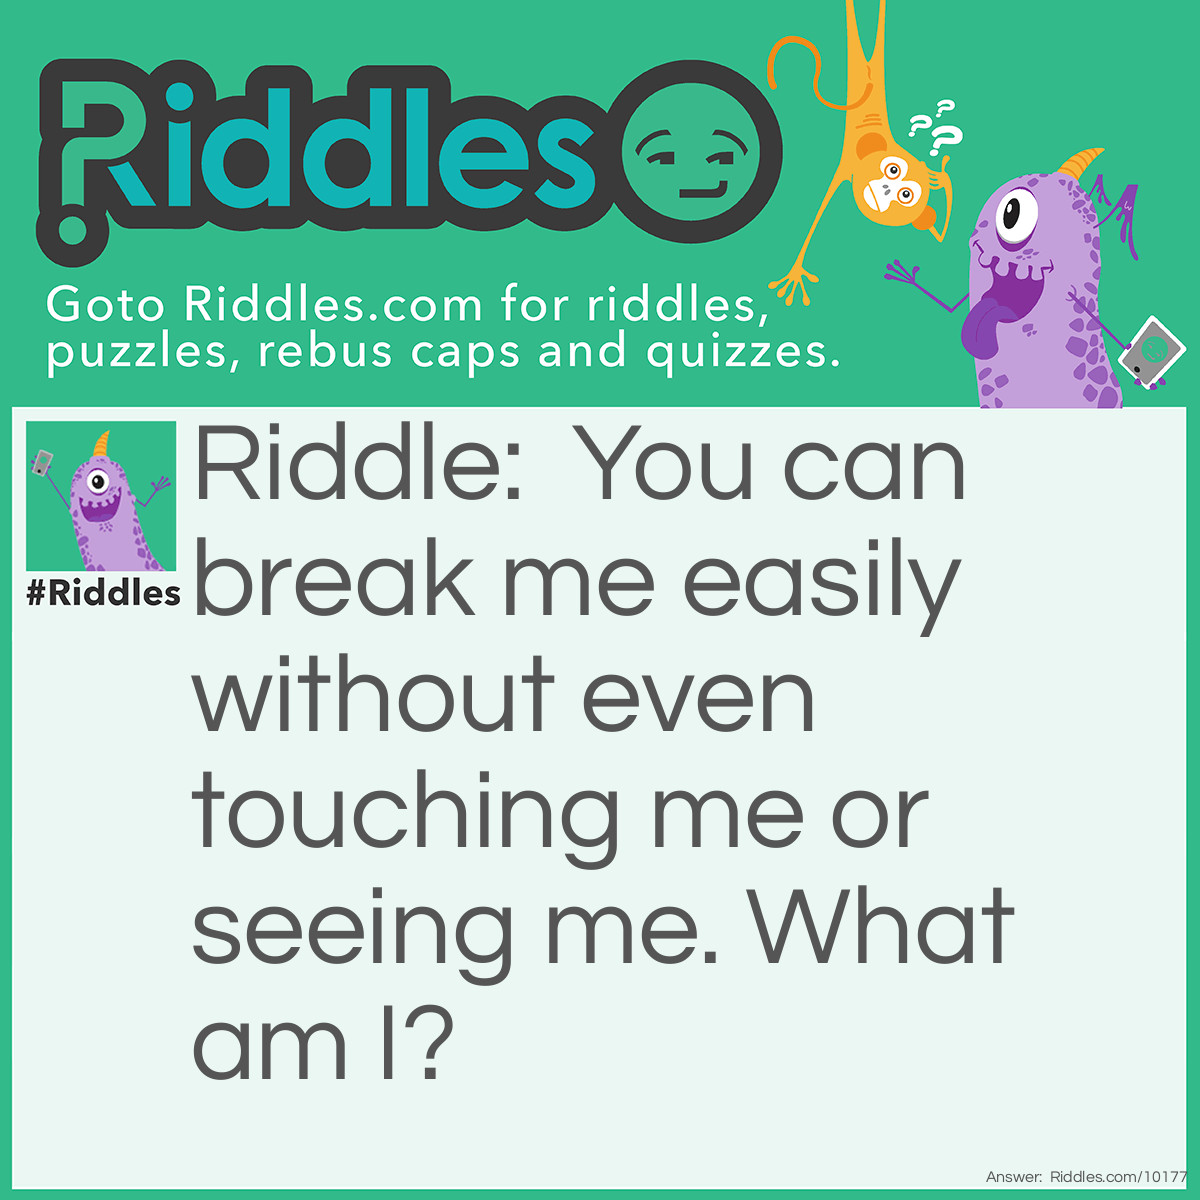 Riddle: You can break me easily without even touching me or seeing me. What am I? Answer: Air.